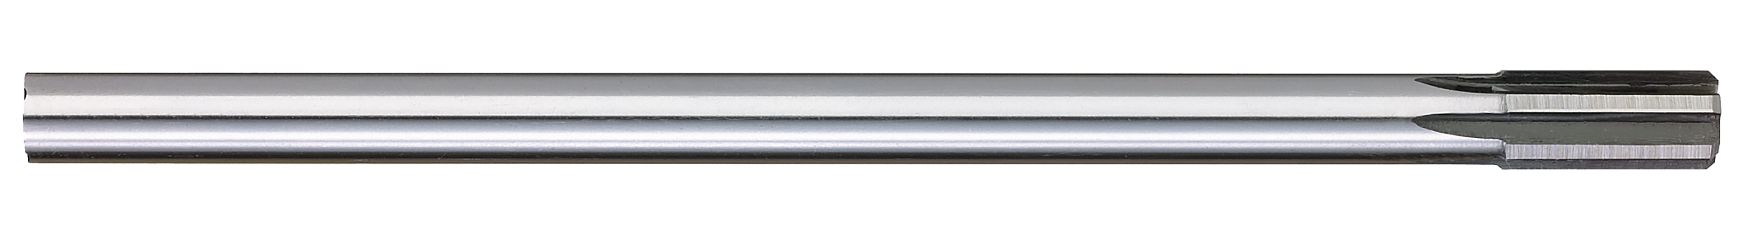 Reamers-High Speed Steel-Expansion-Straight Flute